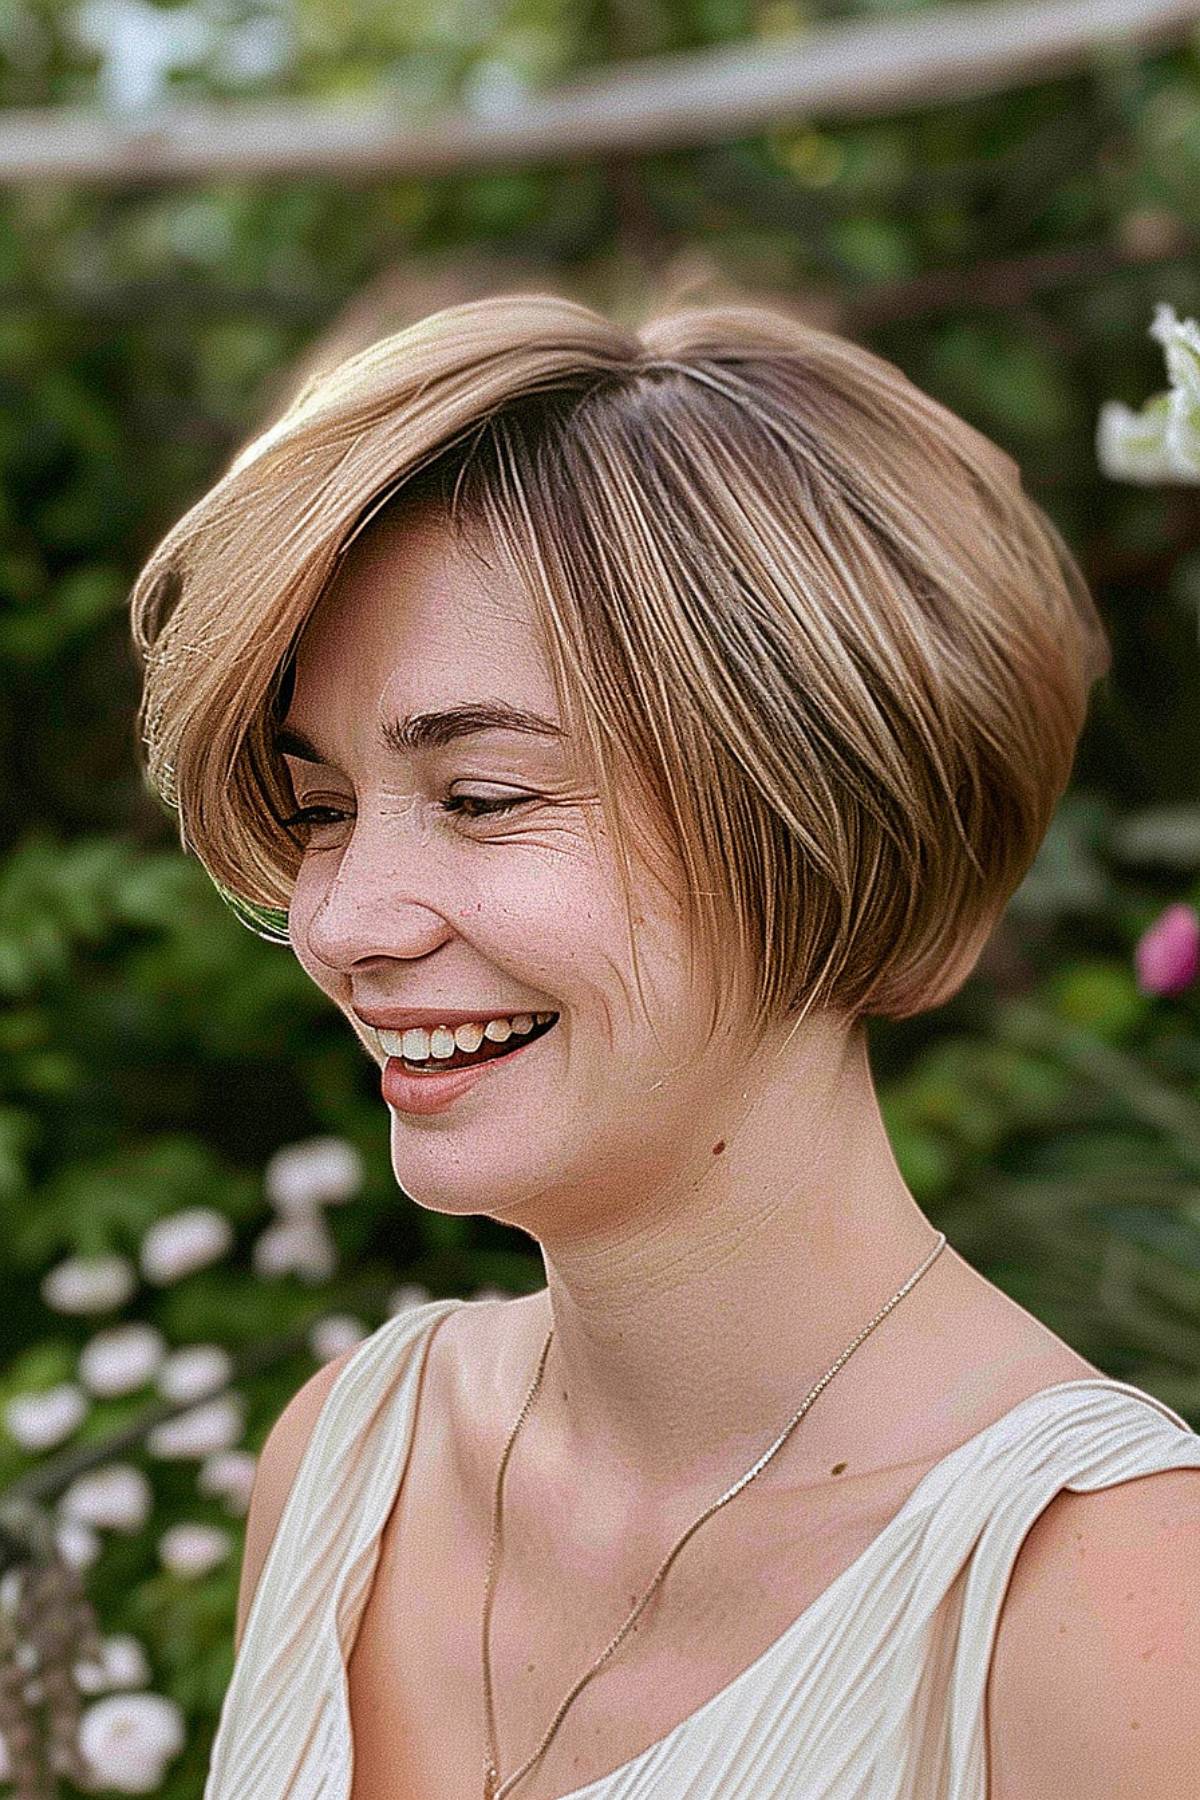 The woman has incorporated elements of a pixie into her layered bob haircut, giving her a tidy yet playful look.